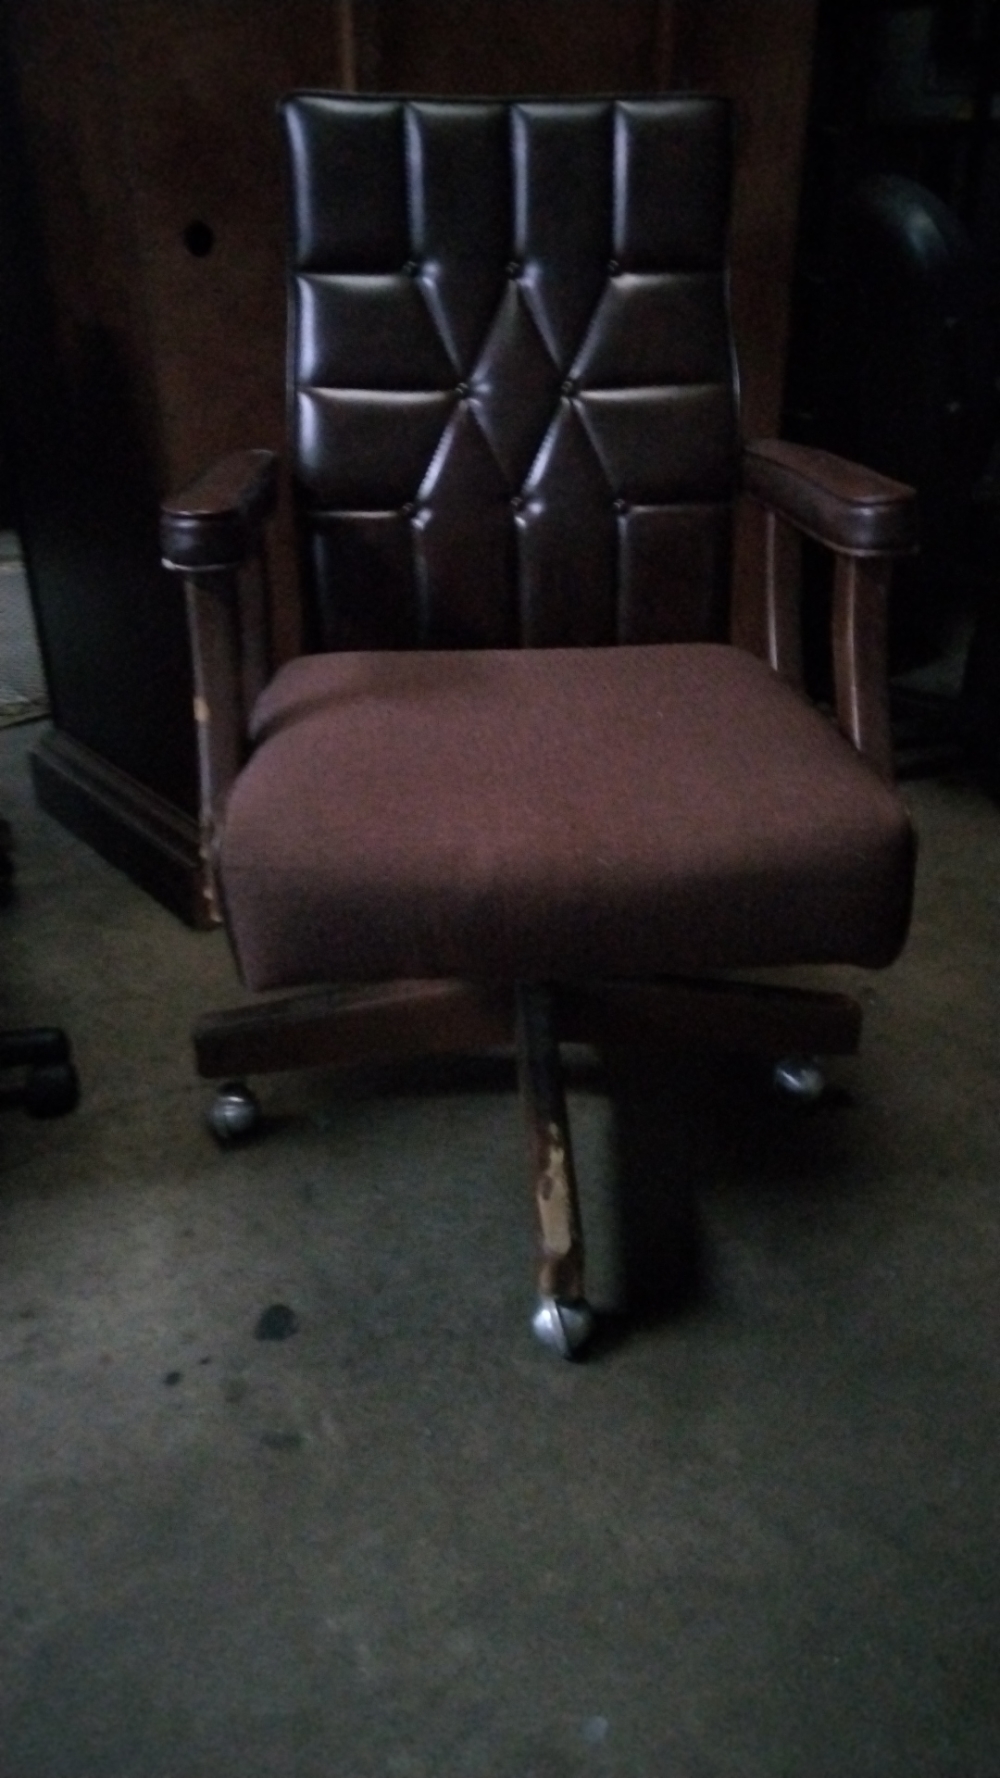  Vintage padded mesh seat/leather back chair